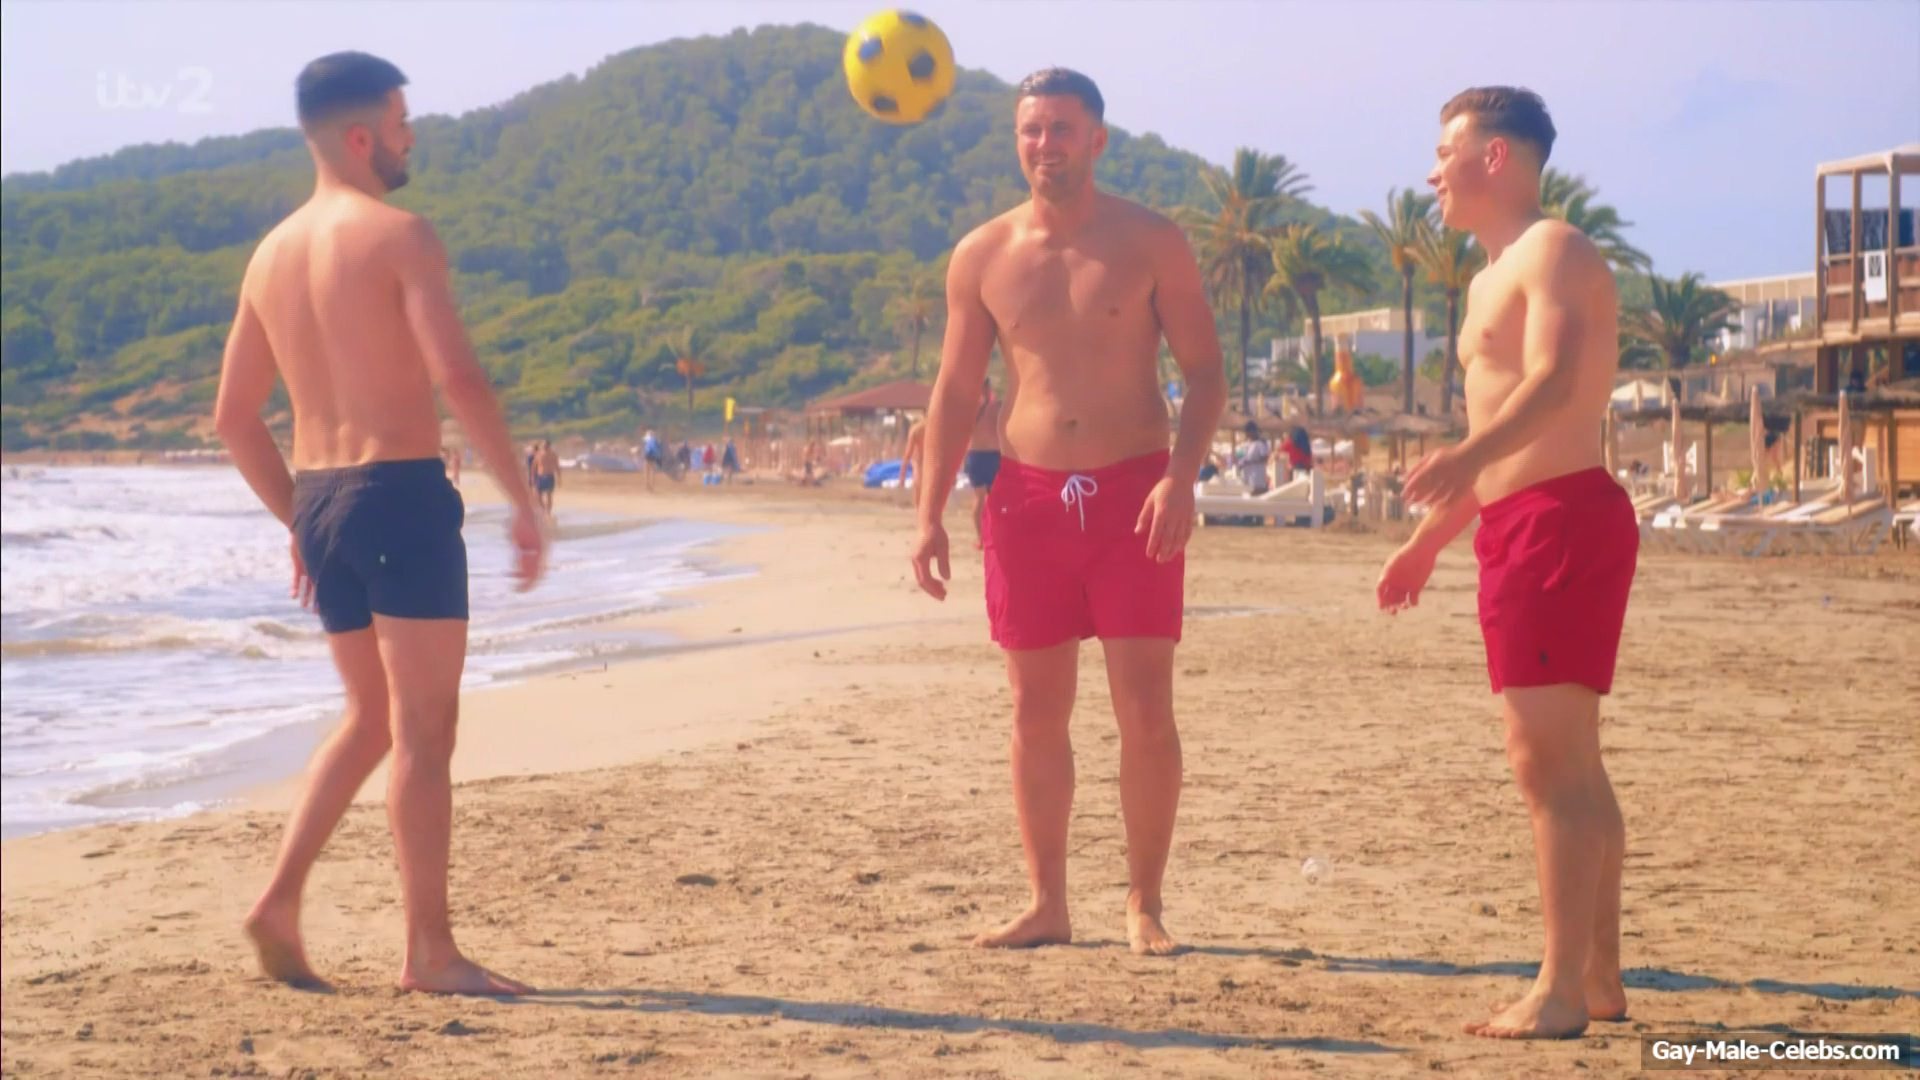 Dan, Ollie, Ash, and Austin Naked From Ibiza Weekender